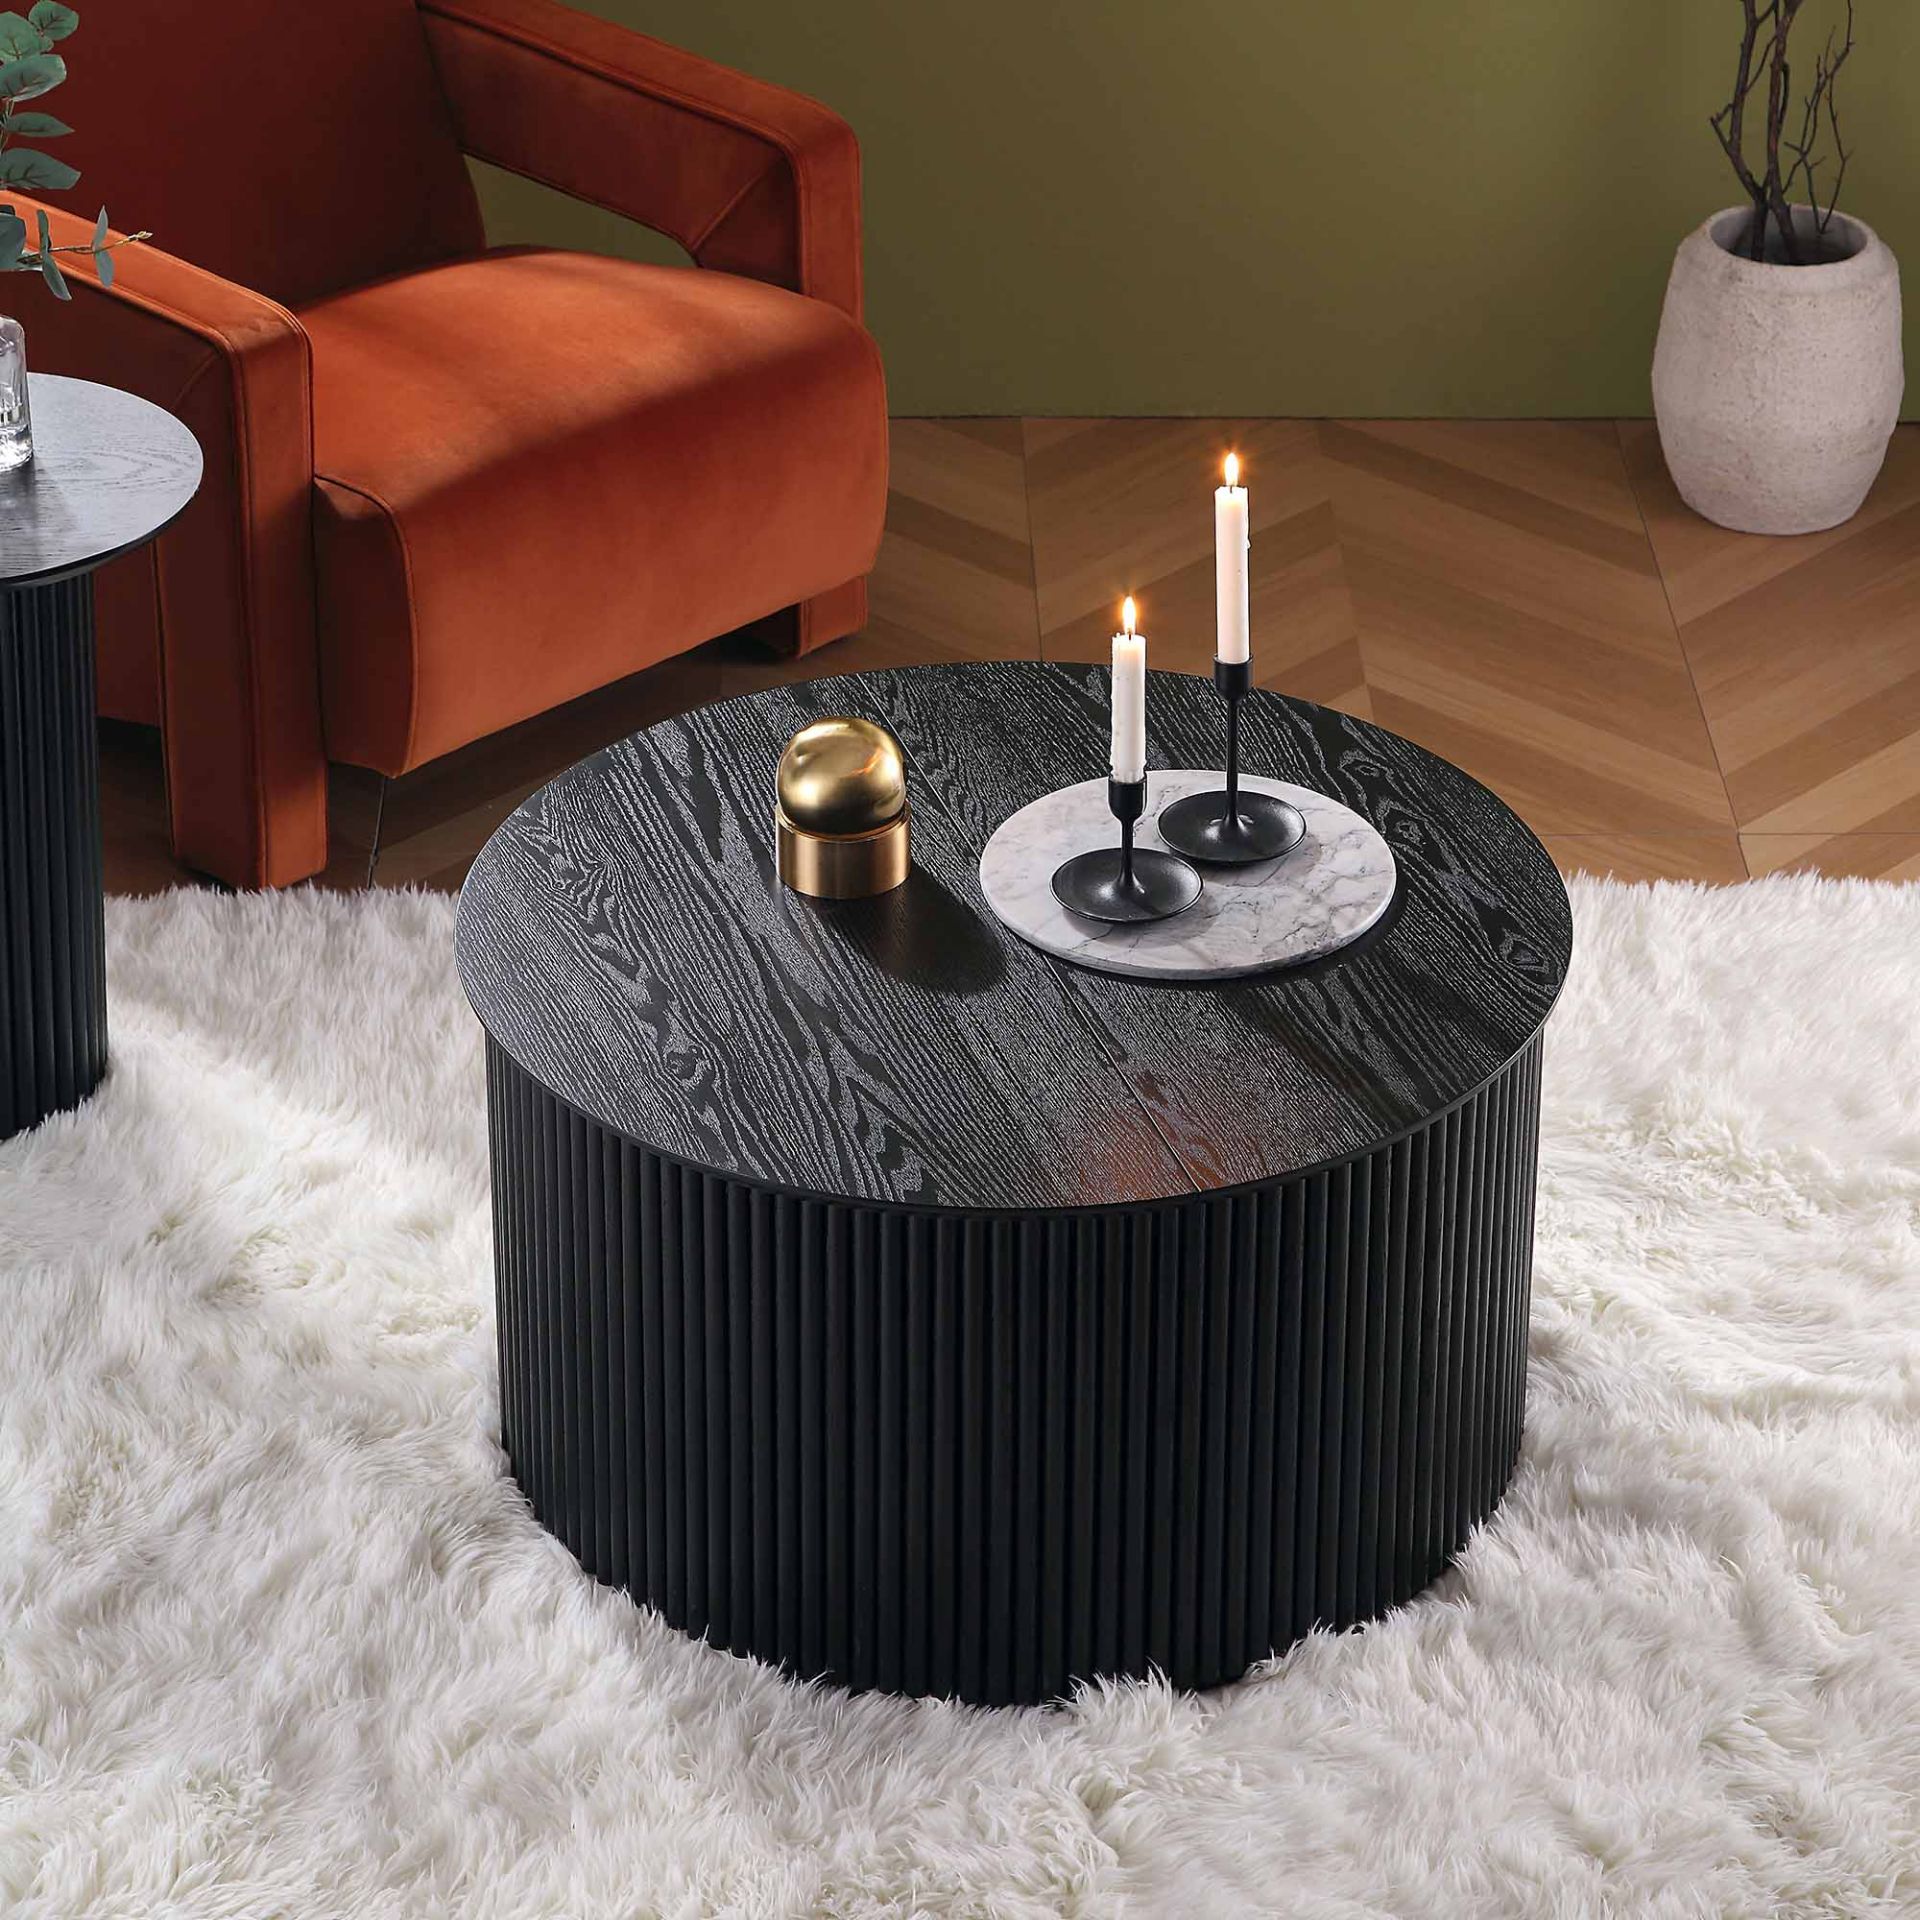 Maru Oak Round Coffee Table with Storage, Black. - R14. RRP £319.99. Featuring fluted base made from